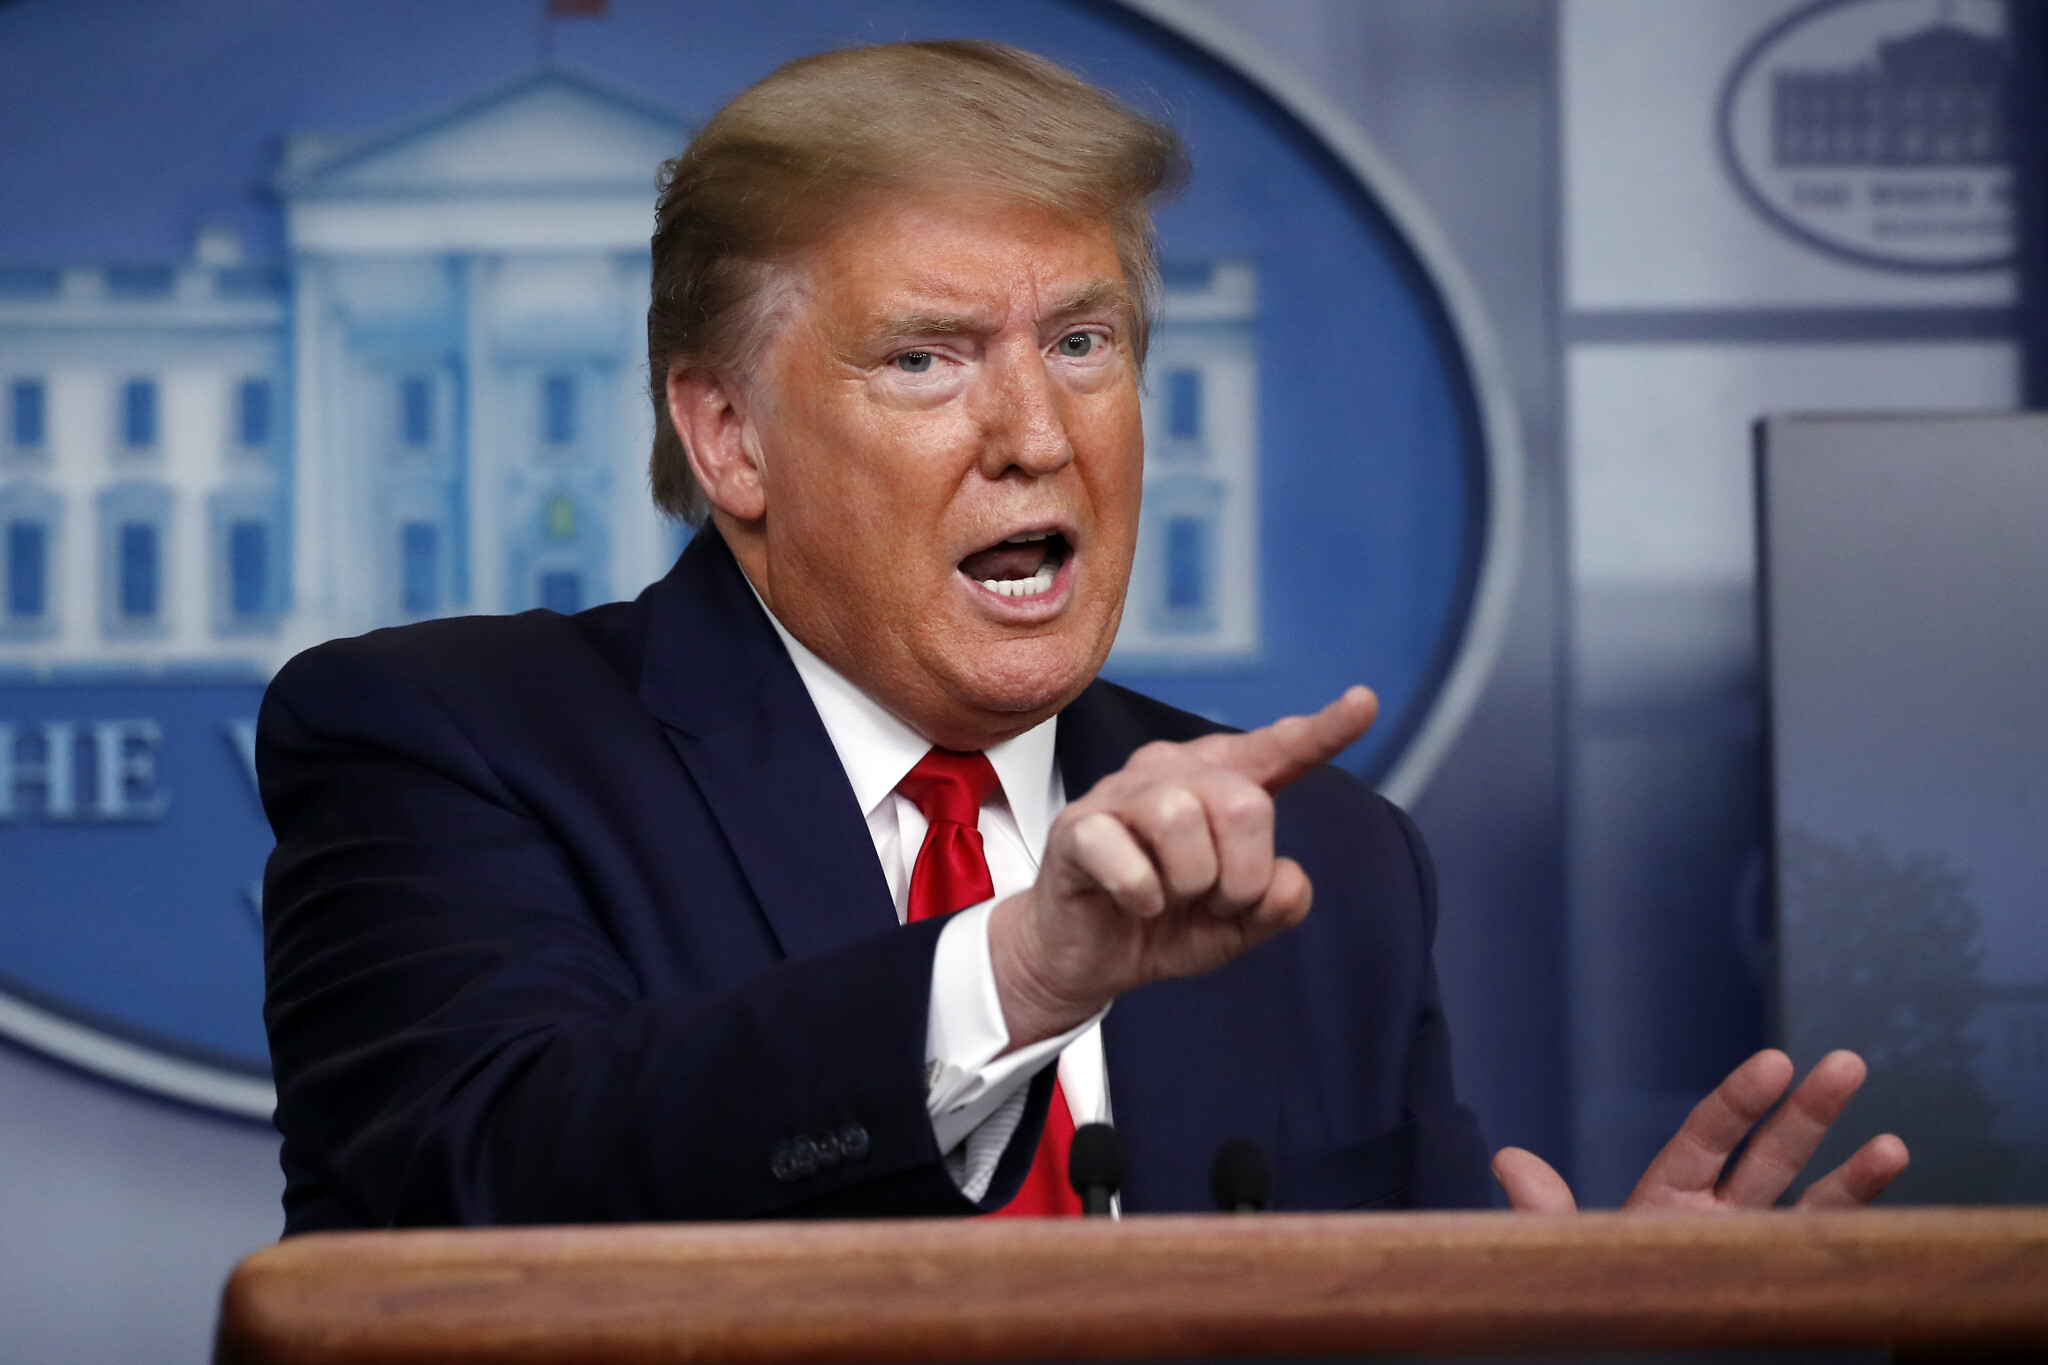 US President Donald Trump speaks about the coronavirus in the James Brady Press Briefing Room at the White House, Monday, April 13, 2020, in Washington. (AP Photo/Alex Brandon)